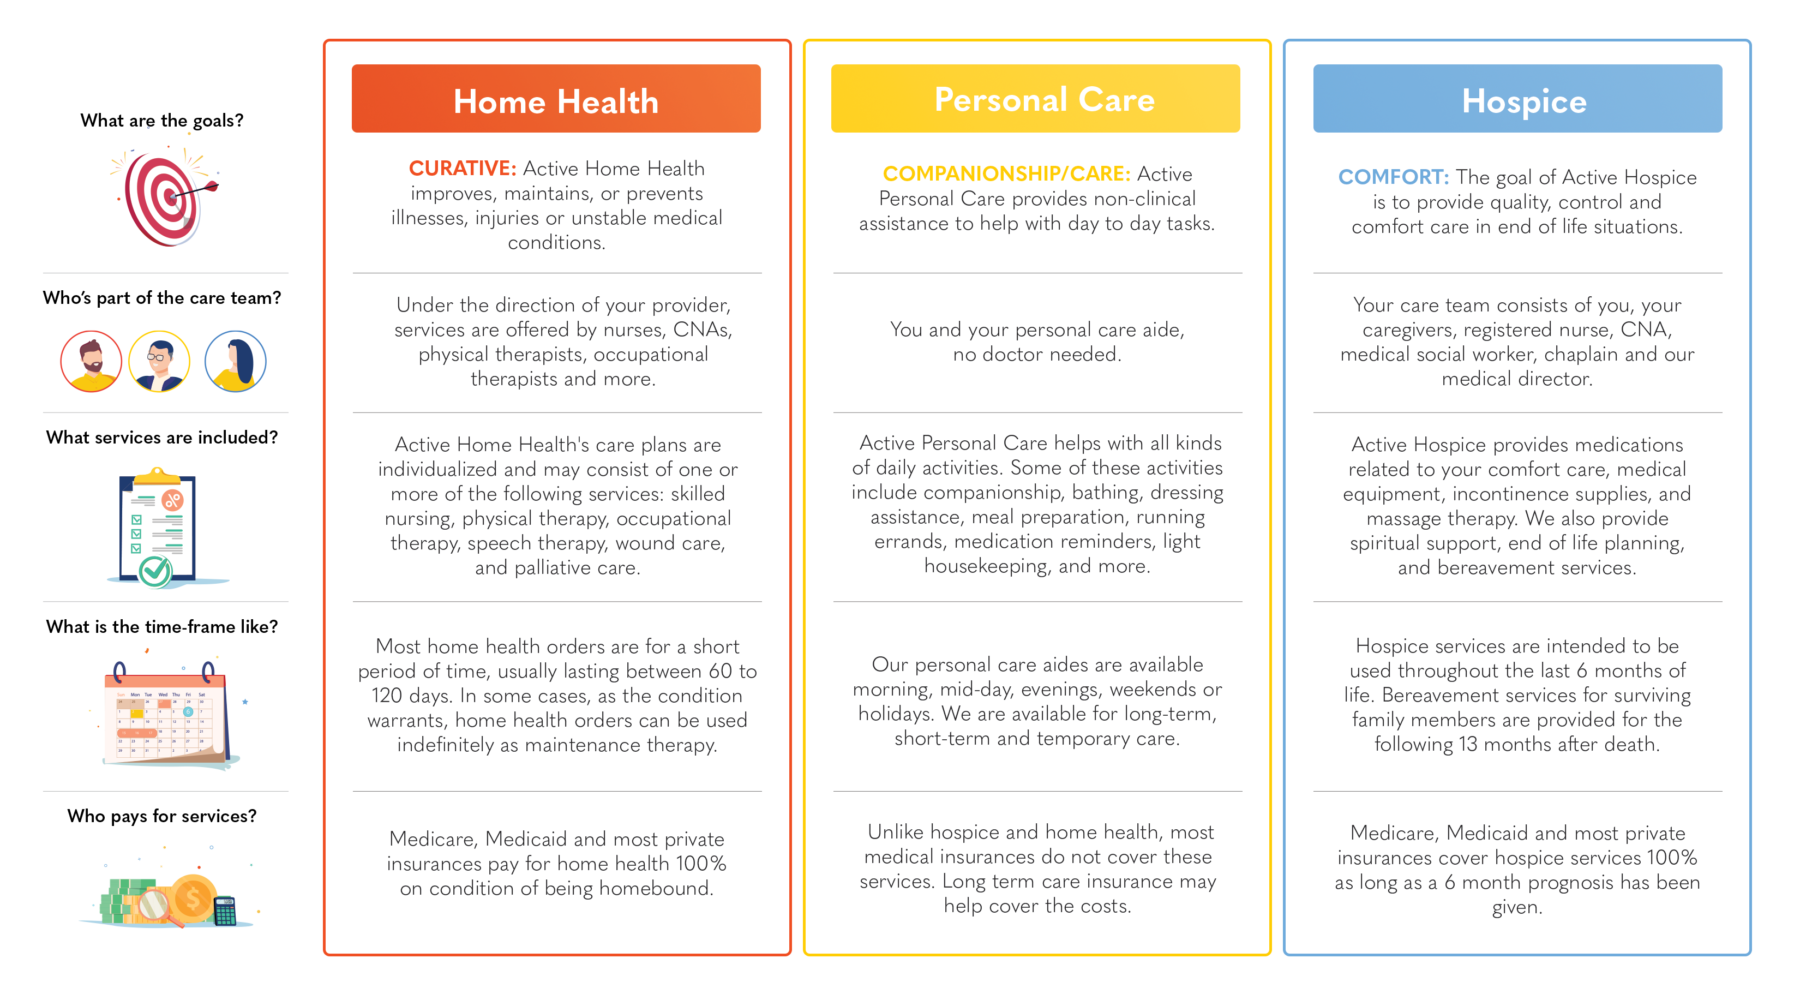 Understanding the differences between home health, hospice and personal care helps you know which service is best for you